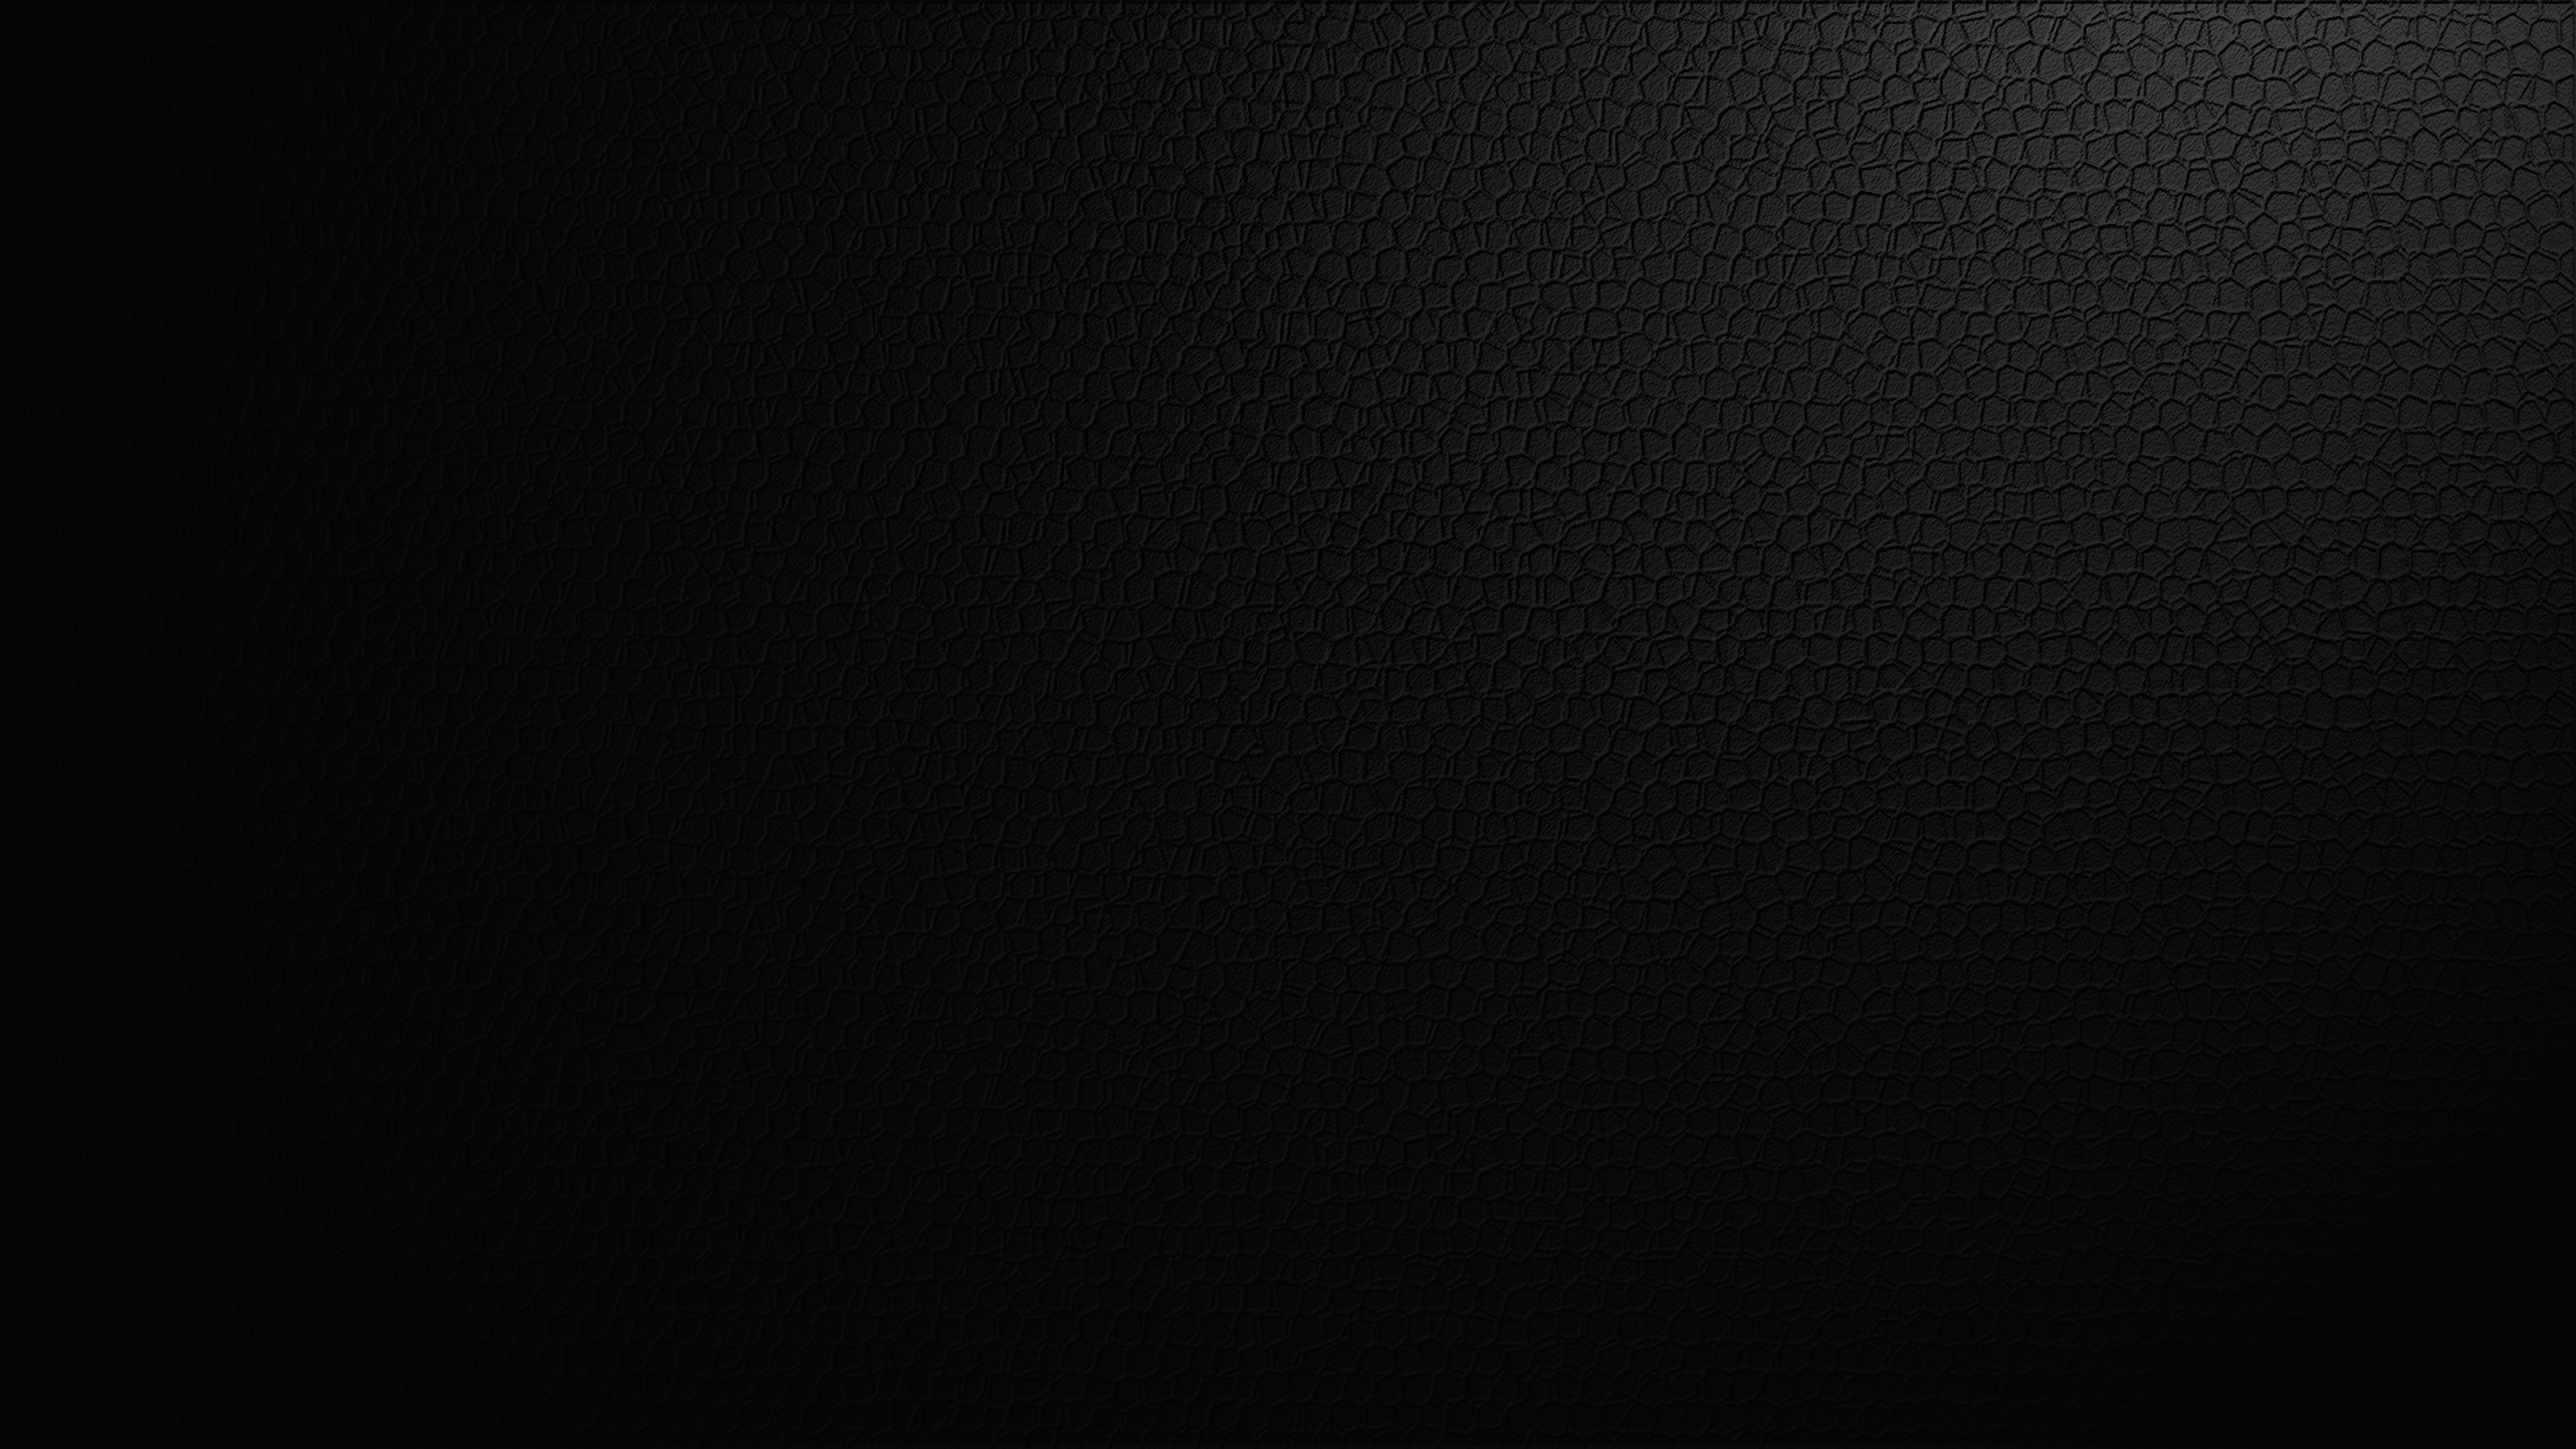  Black  Skin Texture  texture  wallpapers  hd  wallpapers  